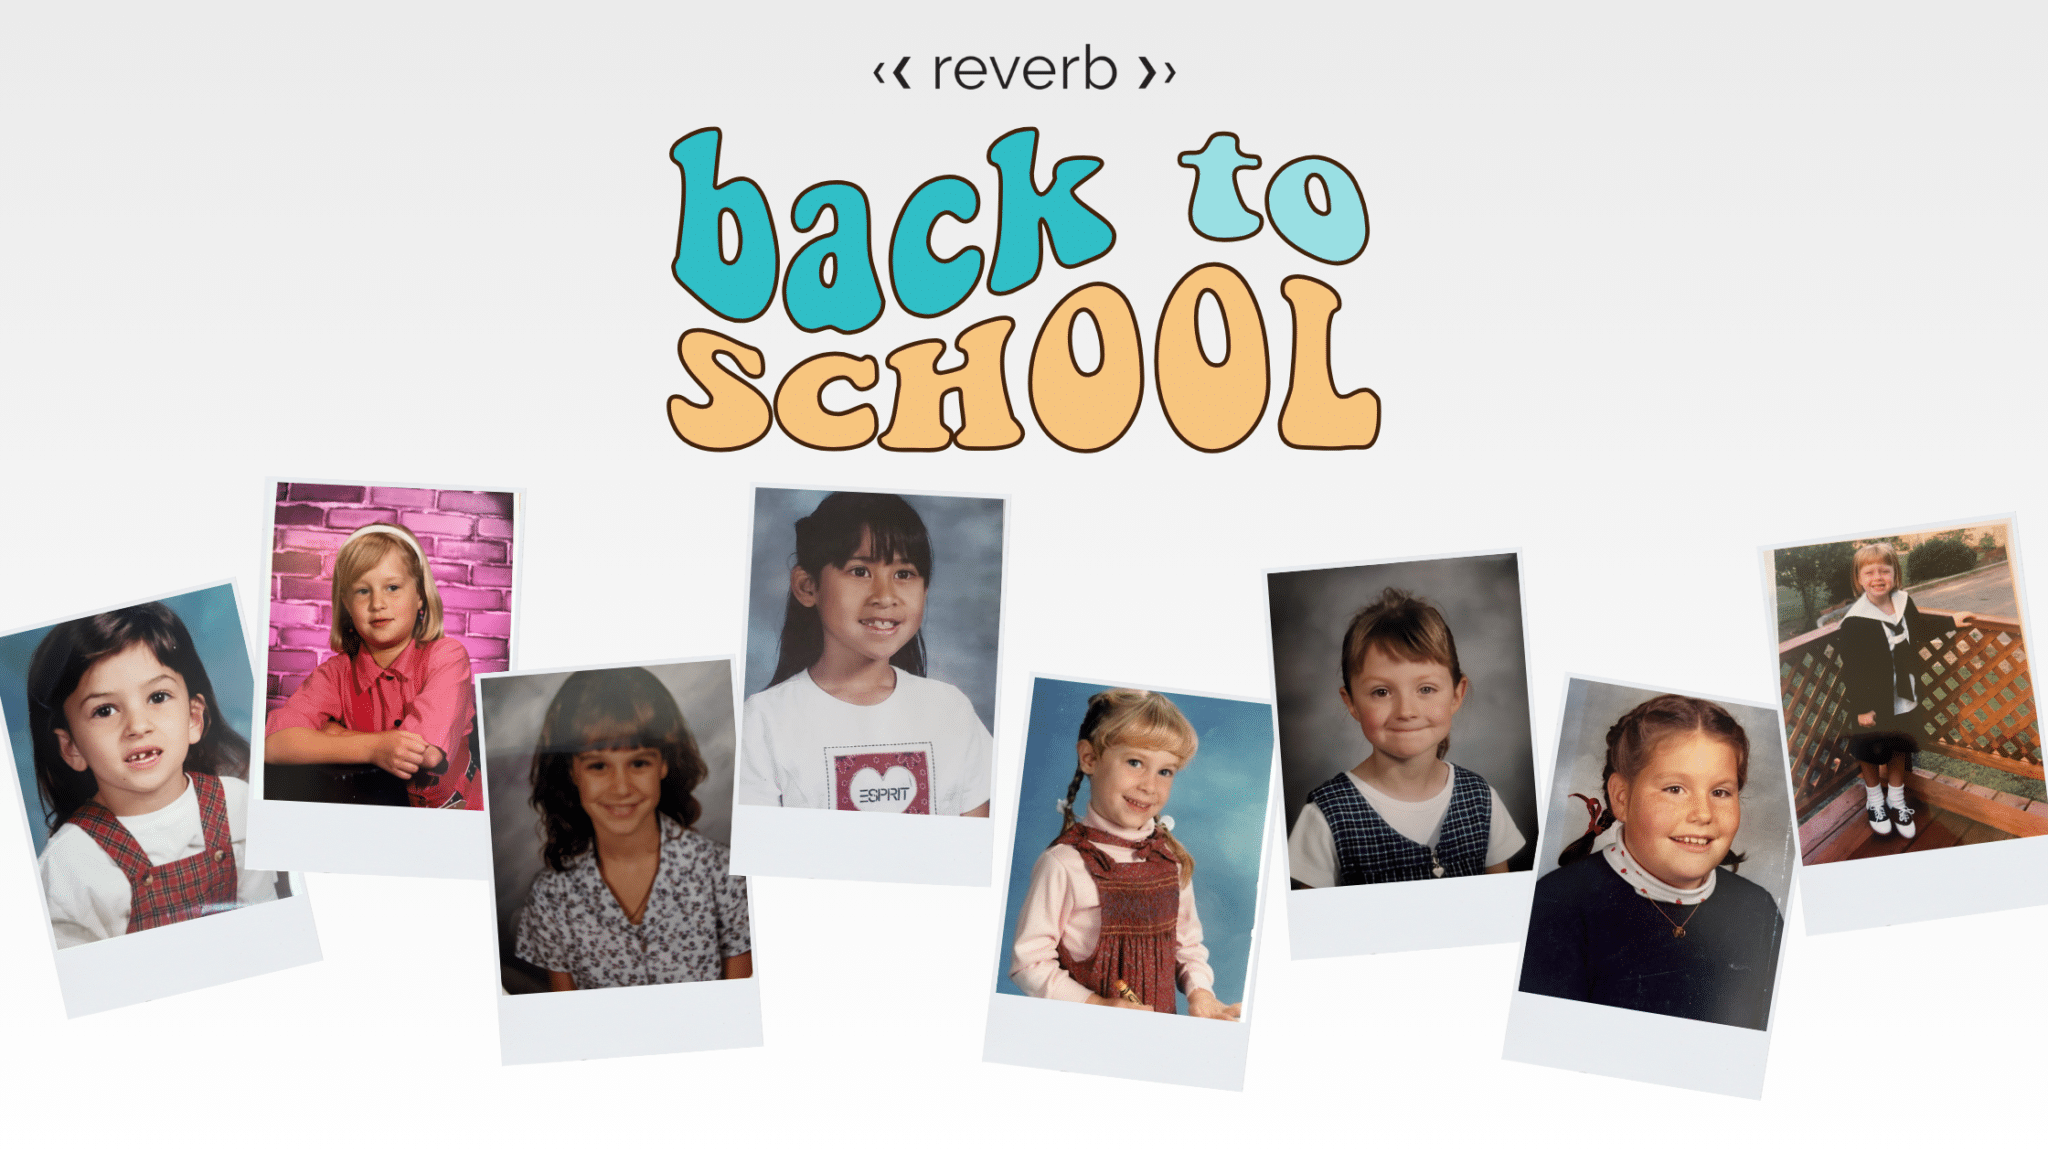 Happy back to school time from the Reverb Team